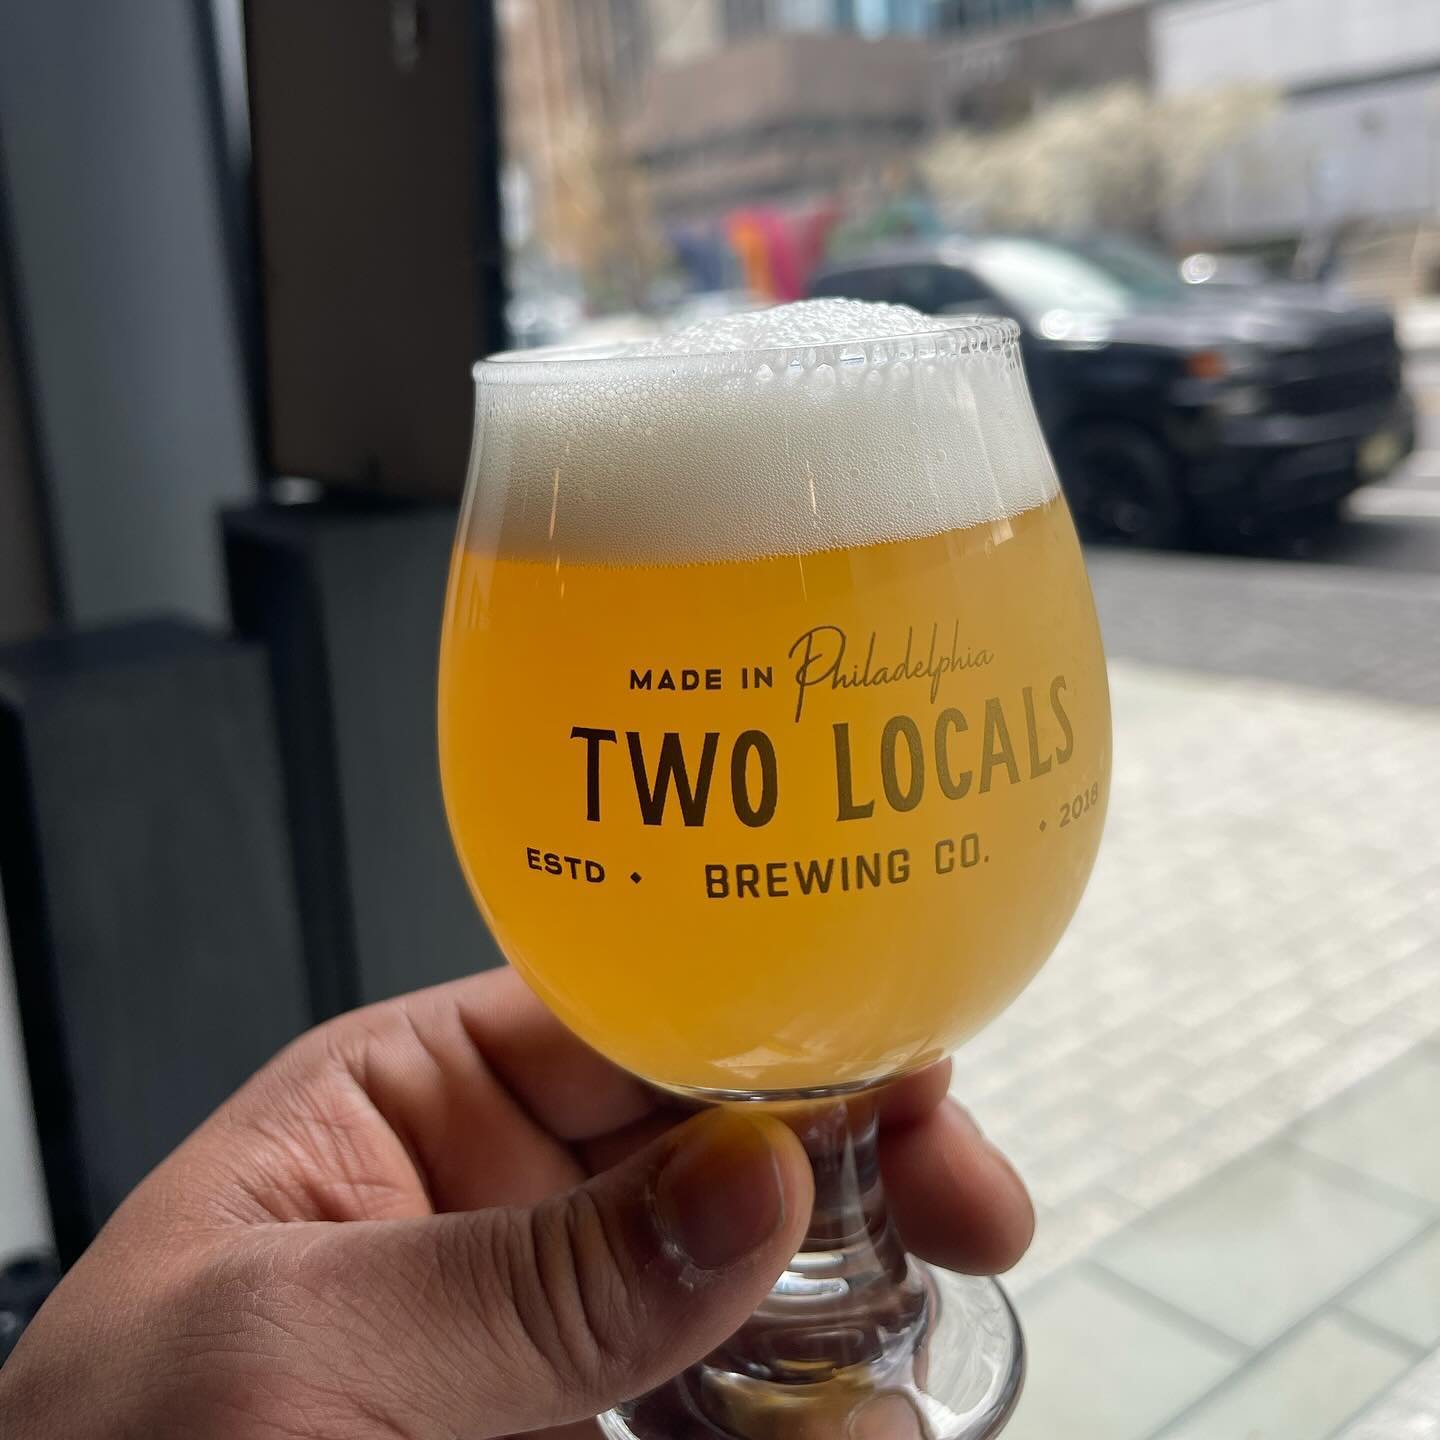 WHO YOU WIT? - Witbier - 5.5%
On draft and in cans. 
&mdash;
Back by popular demand! Just in time for this beautiful weather. Y&rsquo;all kept asking so we gave the people what they wanted. Brewed with Pilsner and wheat. Orange peel, lemon peel, and 